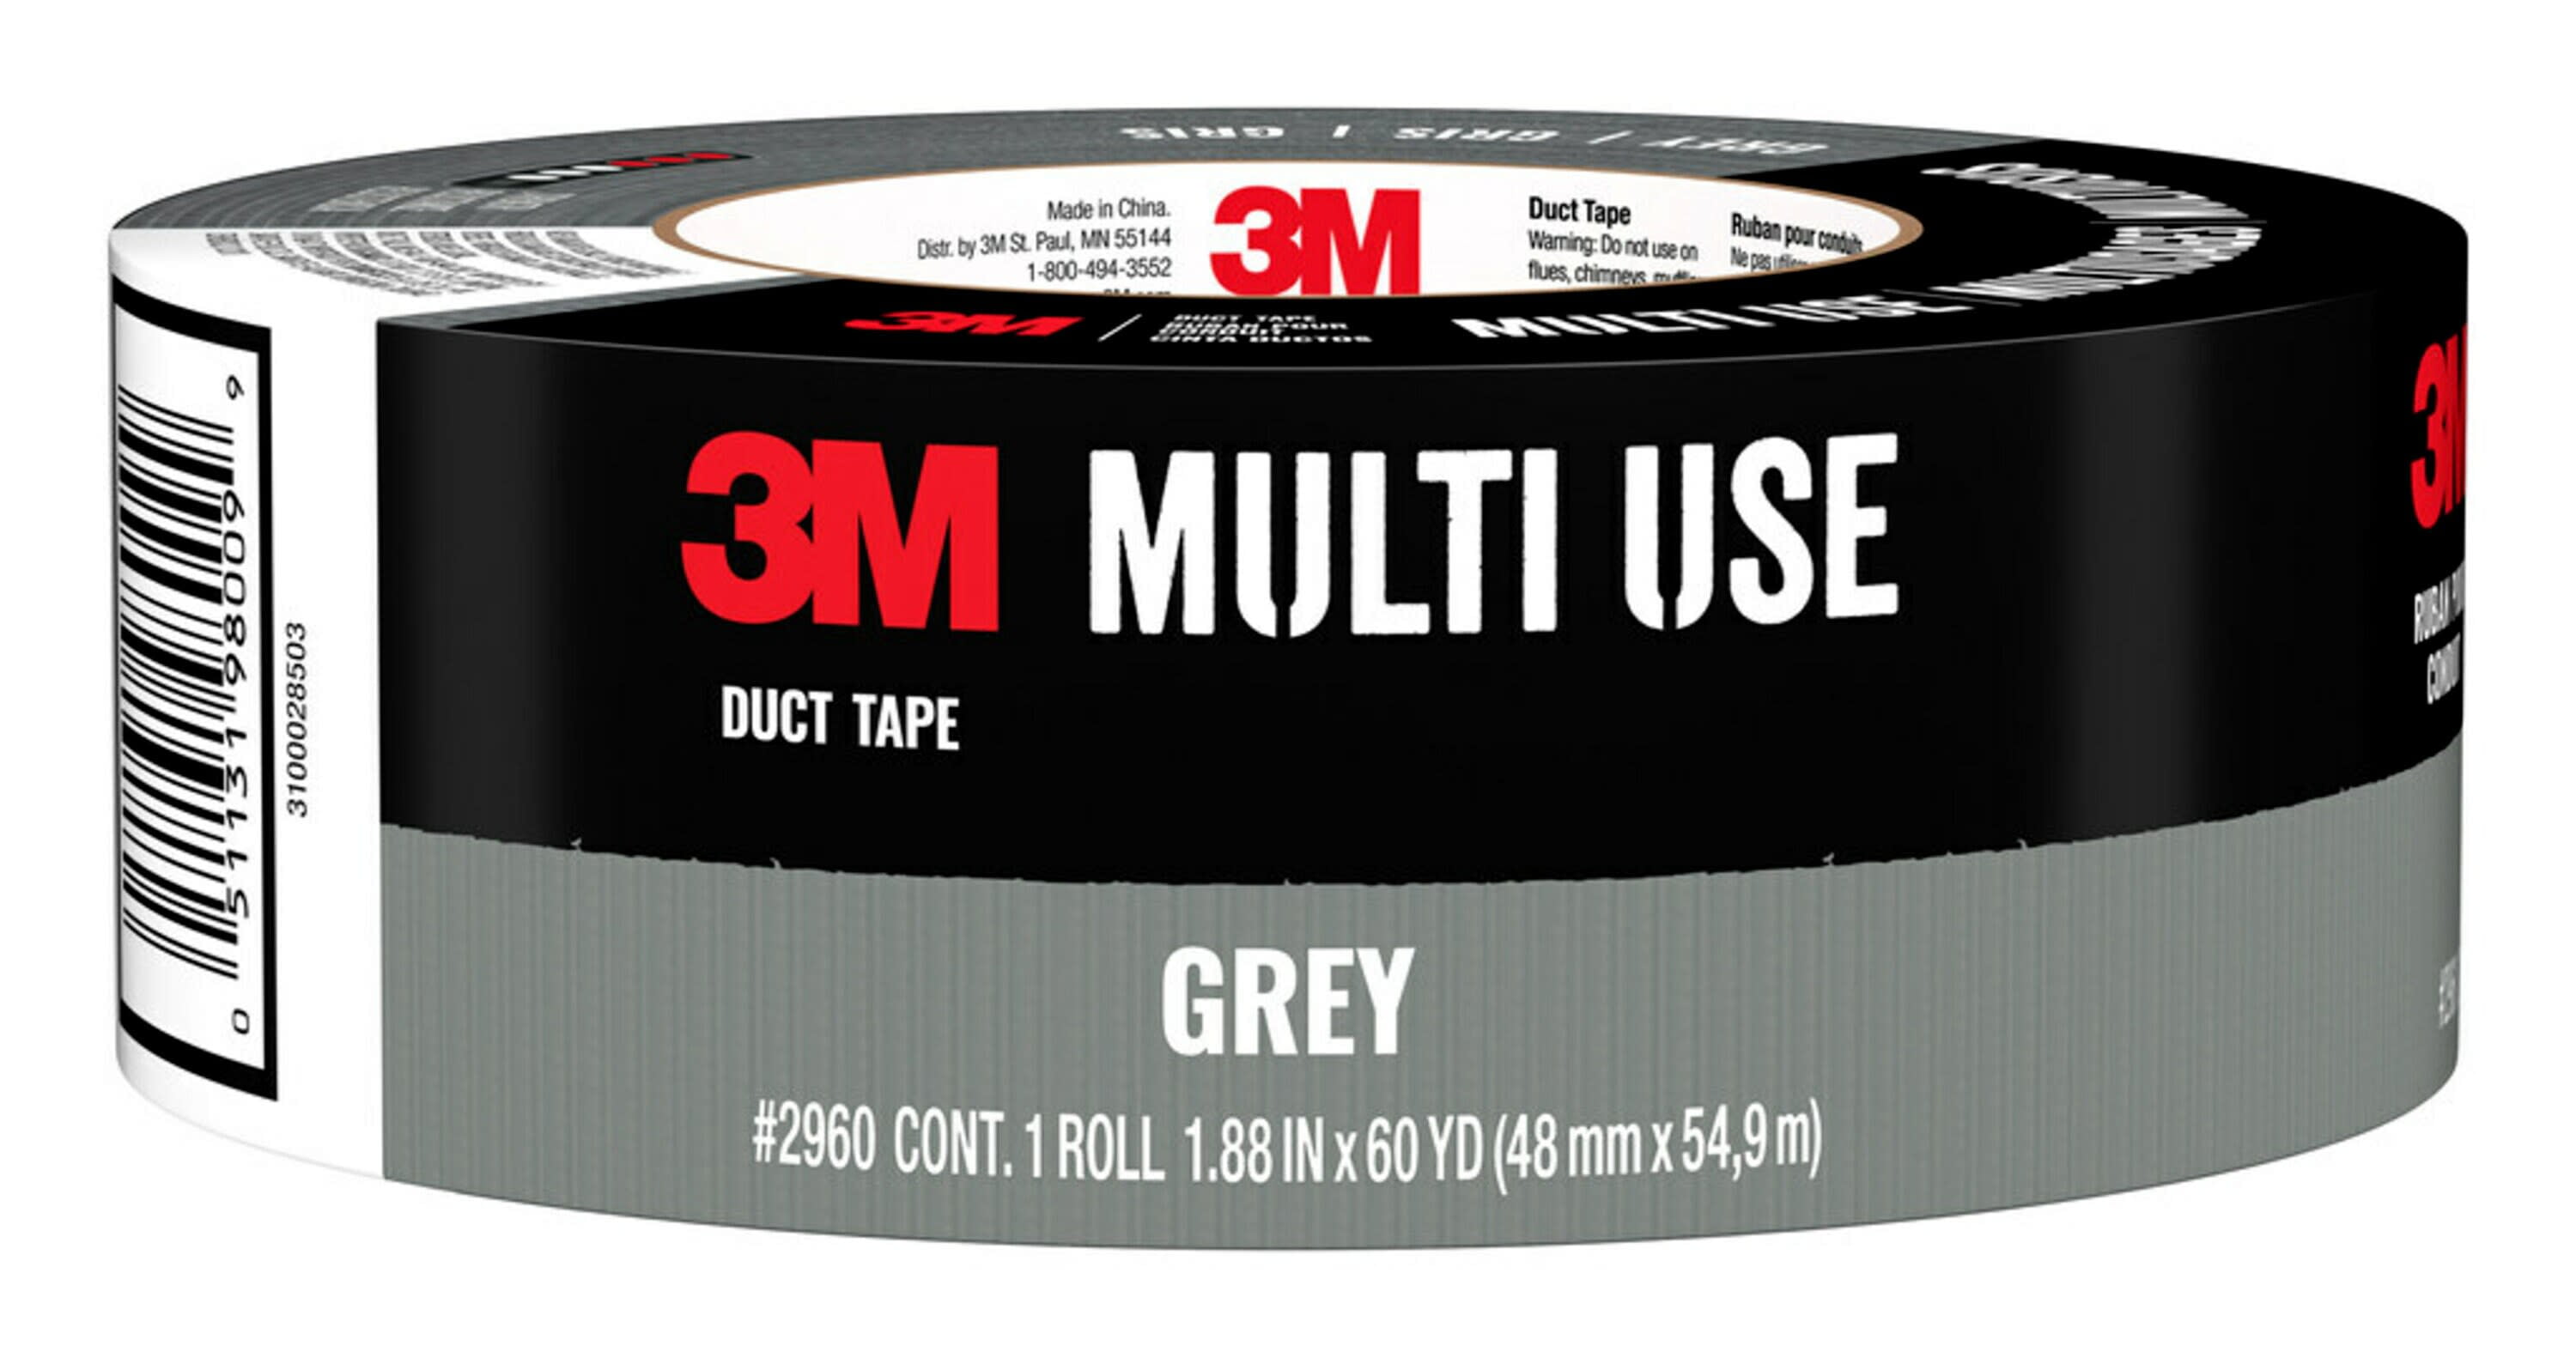 China Seal Pack Girl Hd Video - 3M Multi-Use Duct Tape, 1.88 in x 60 yd, Gray, 1 Roll/Pack - Walmart.com